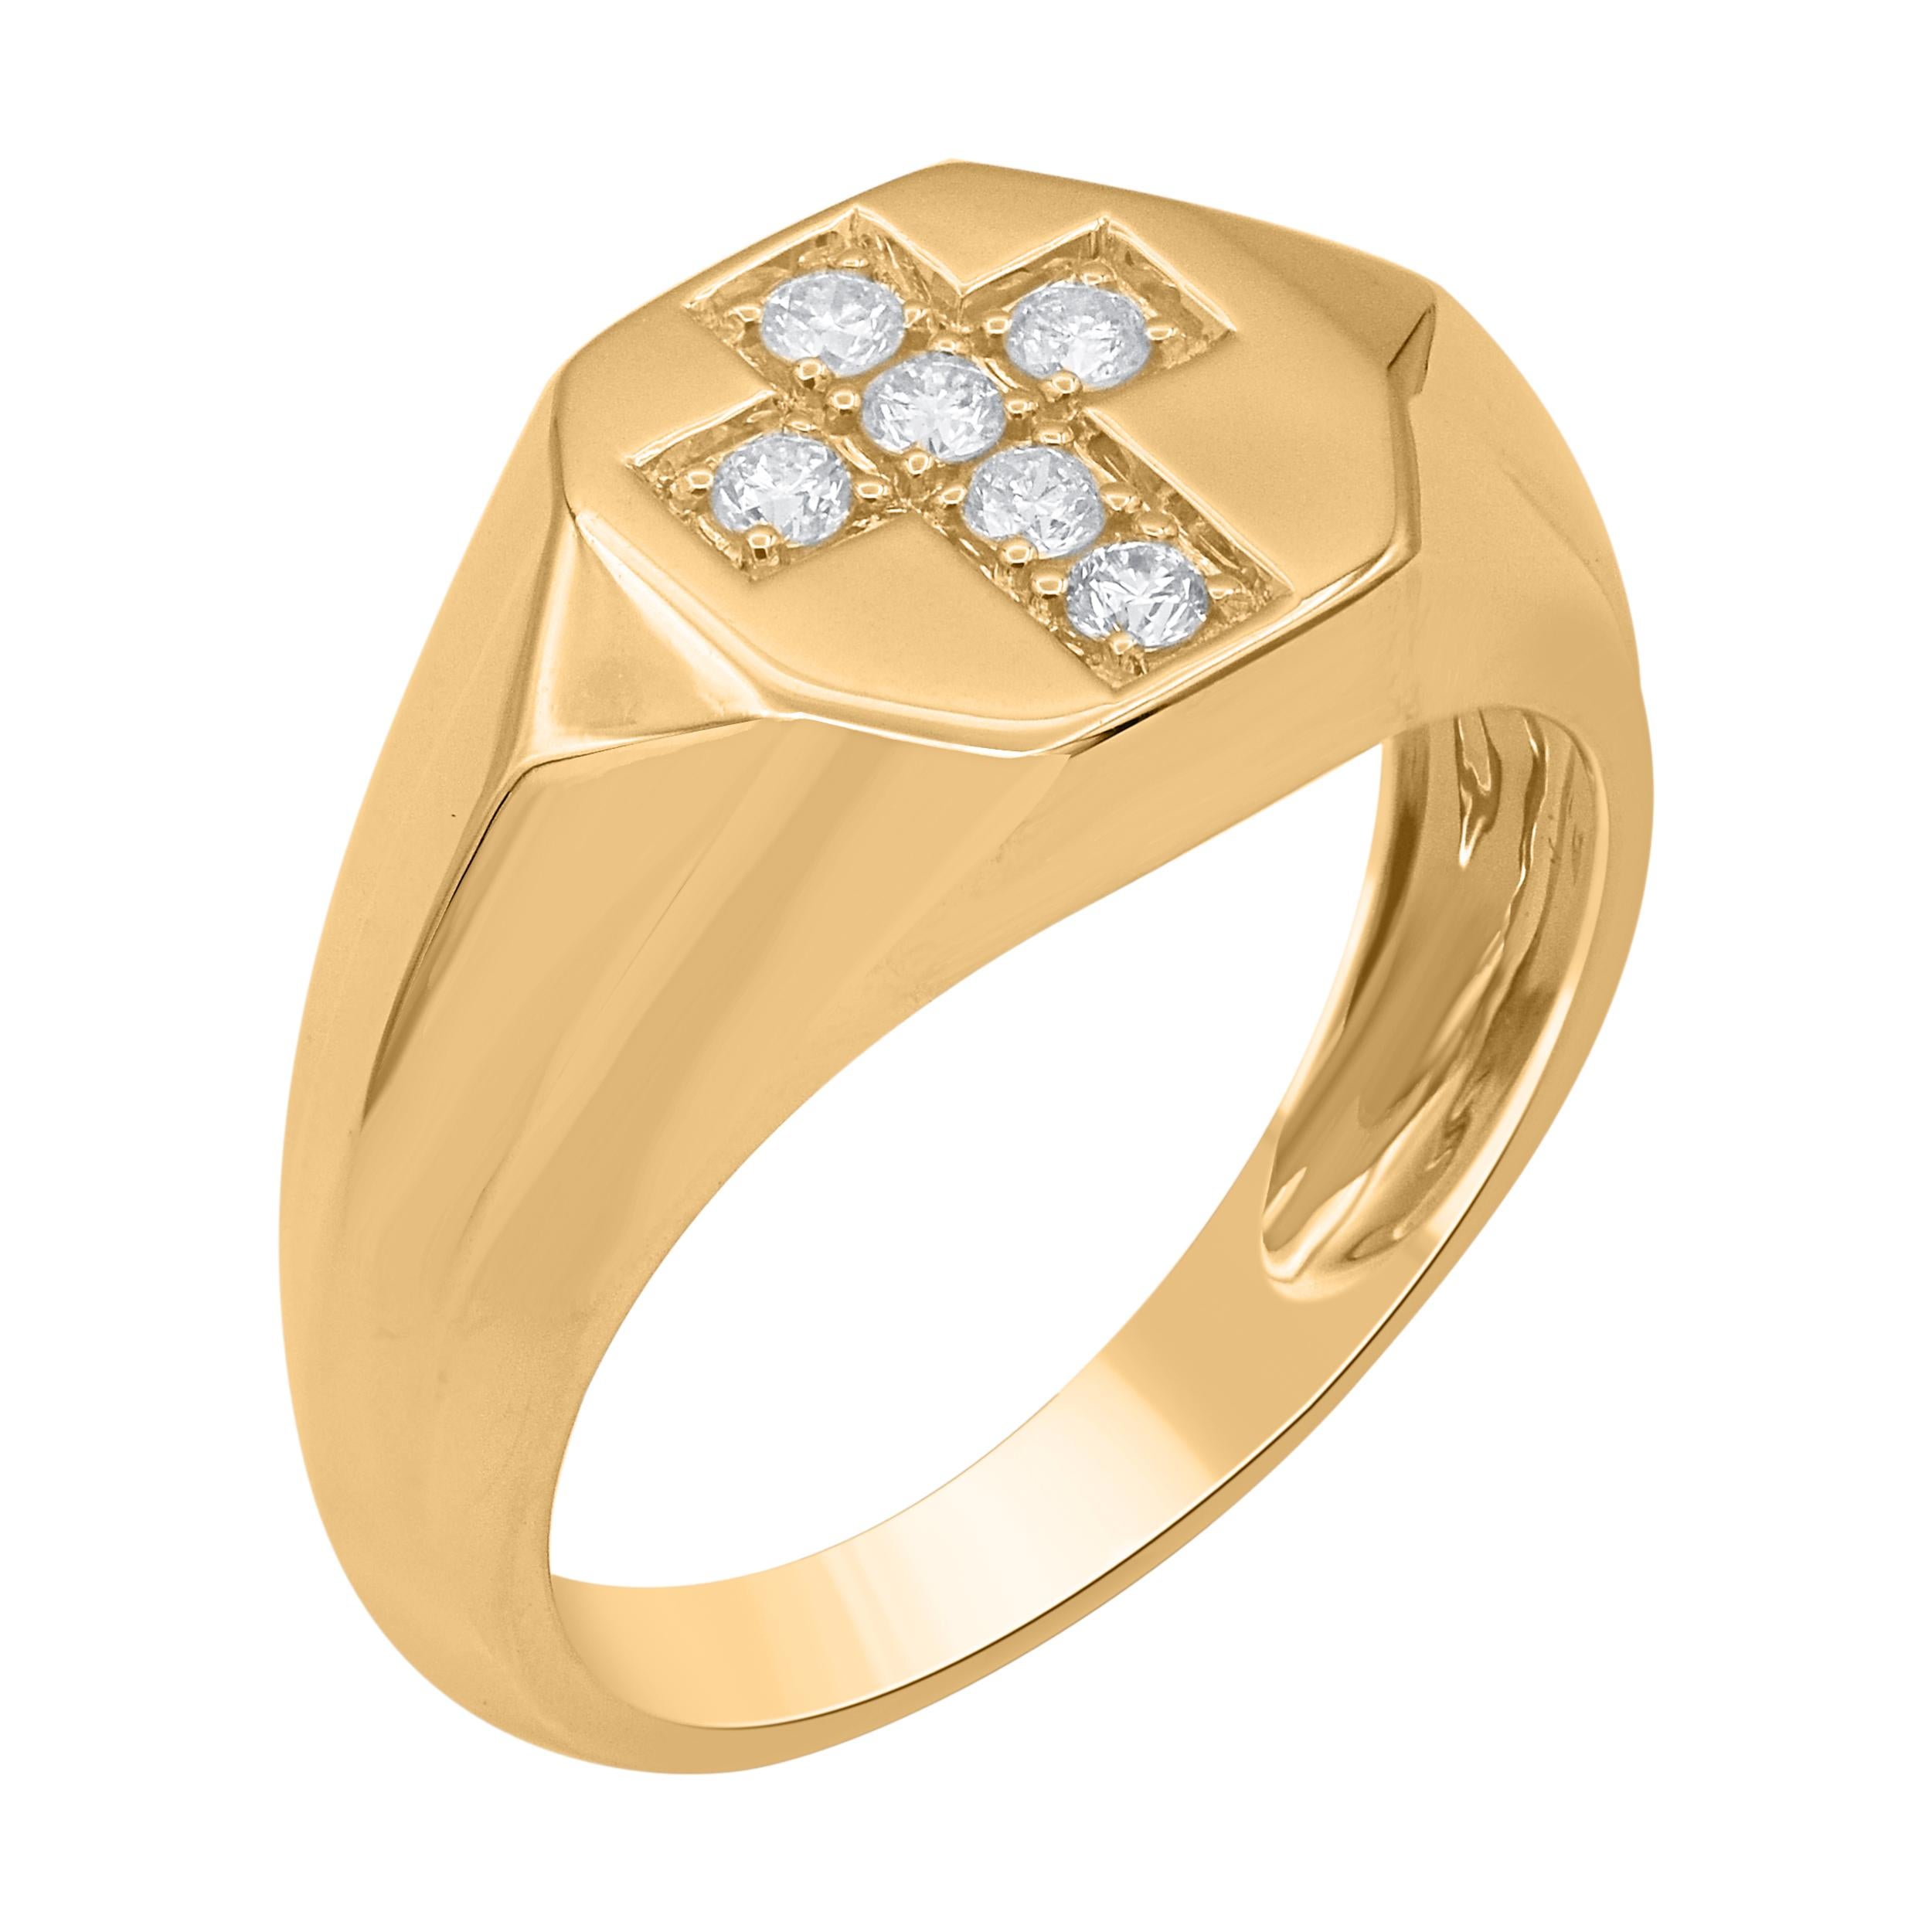 This diamond cross ring is a bold statement of faith. These cross ring are studded with 6 brilliant cut 0.25ct natural diamonds in 14KT yellow gold. The white diamonds are graded as H-I color and I-2 clarity.